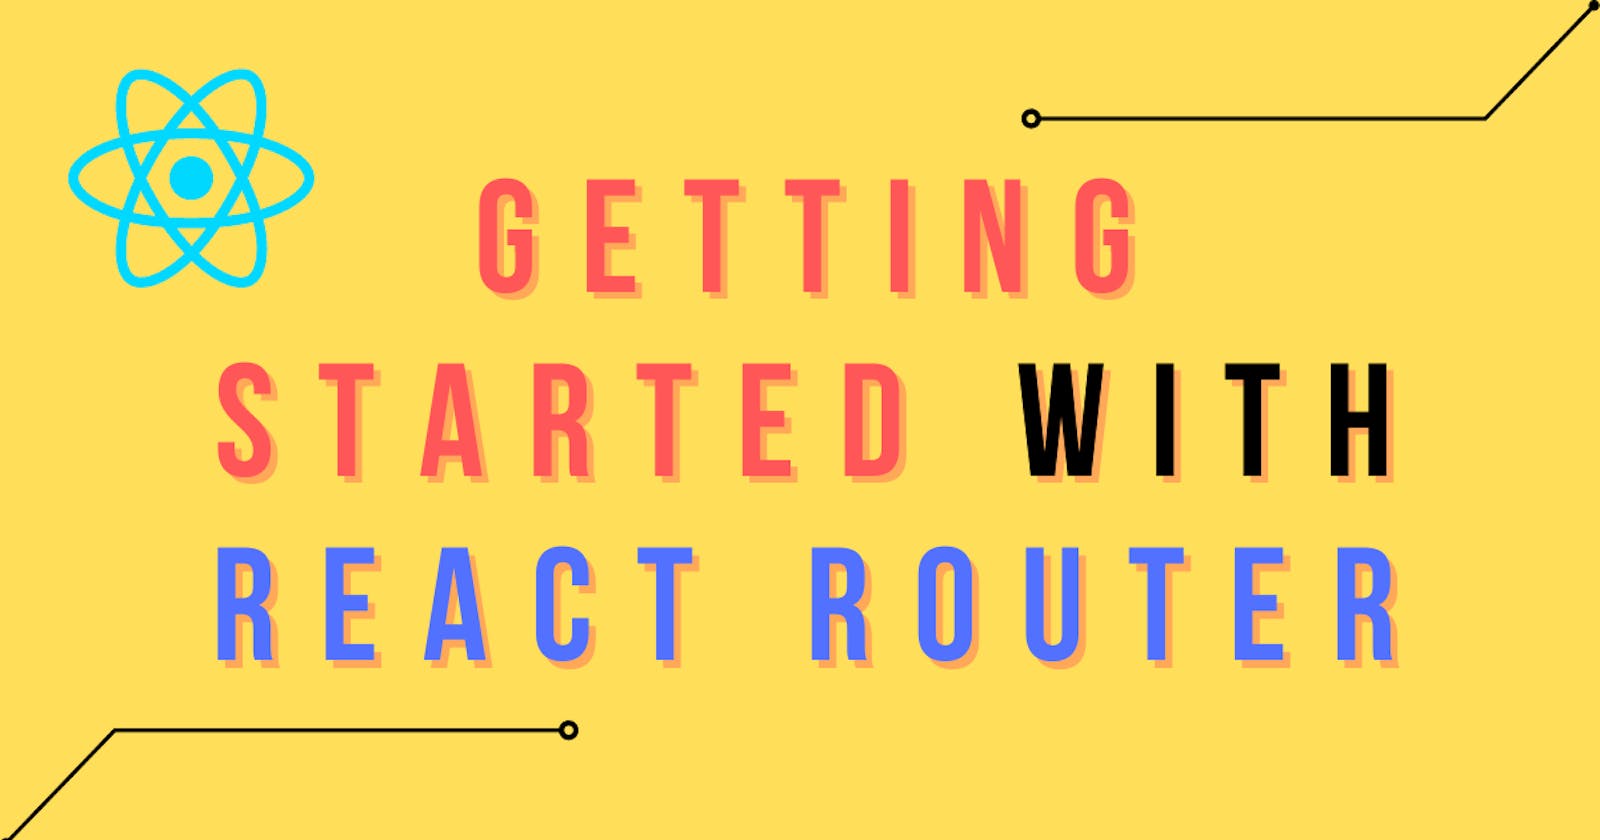 Getting started with React Router